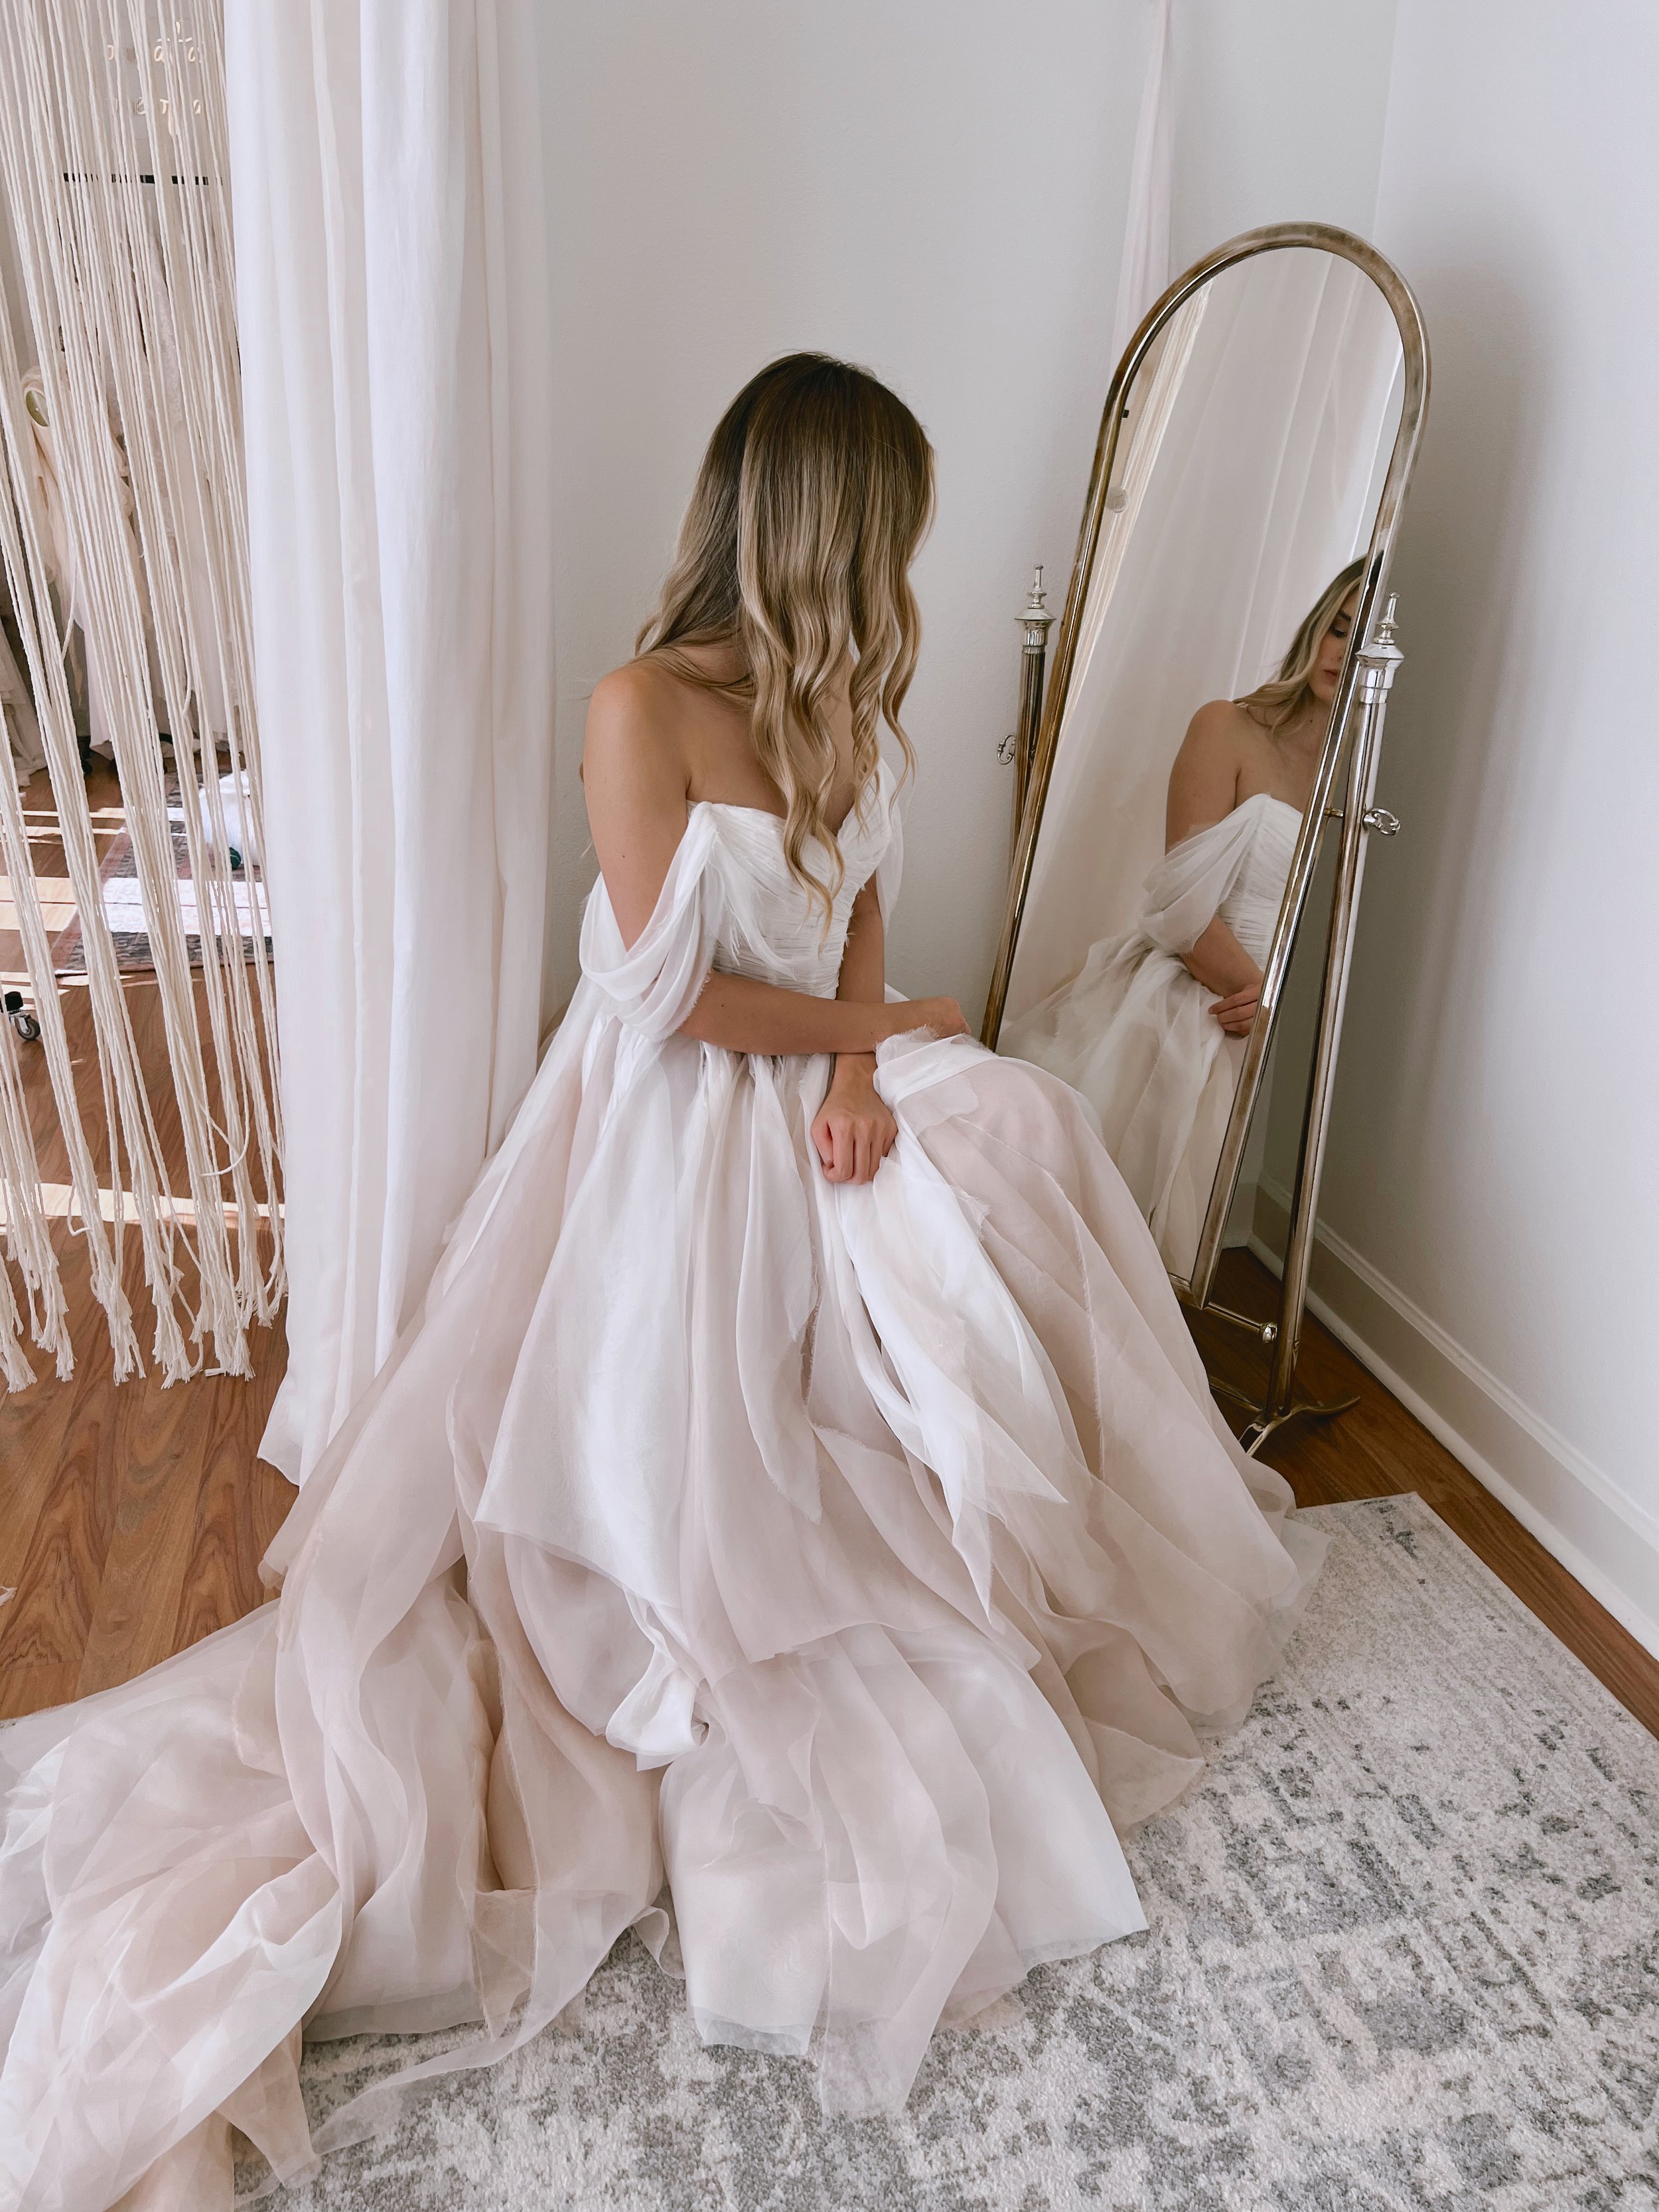 Wedding dress rentals for brides, small weddings, vow renewals, anniversary  styled shoots. — Daci Gowns